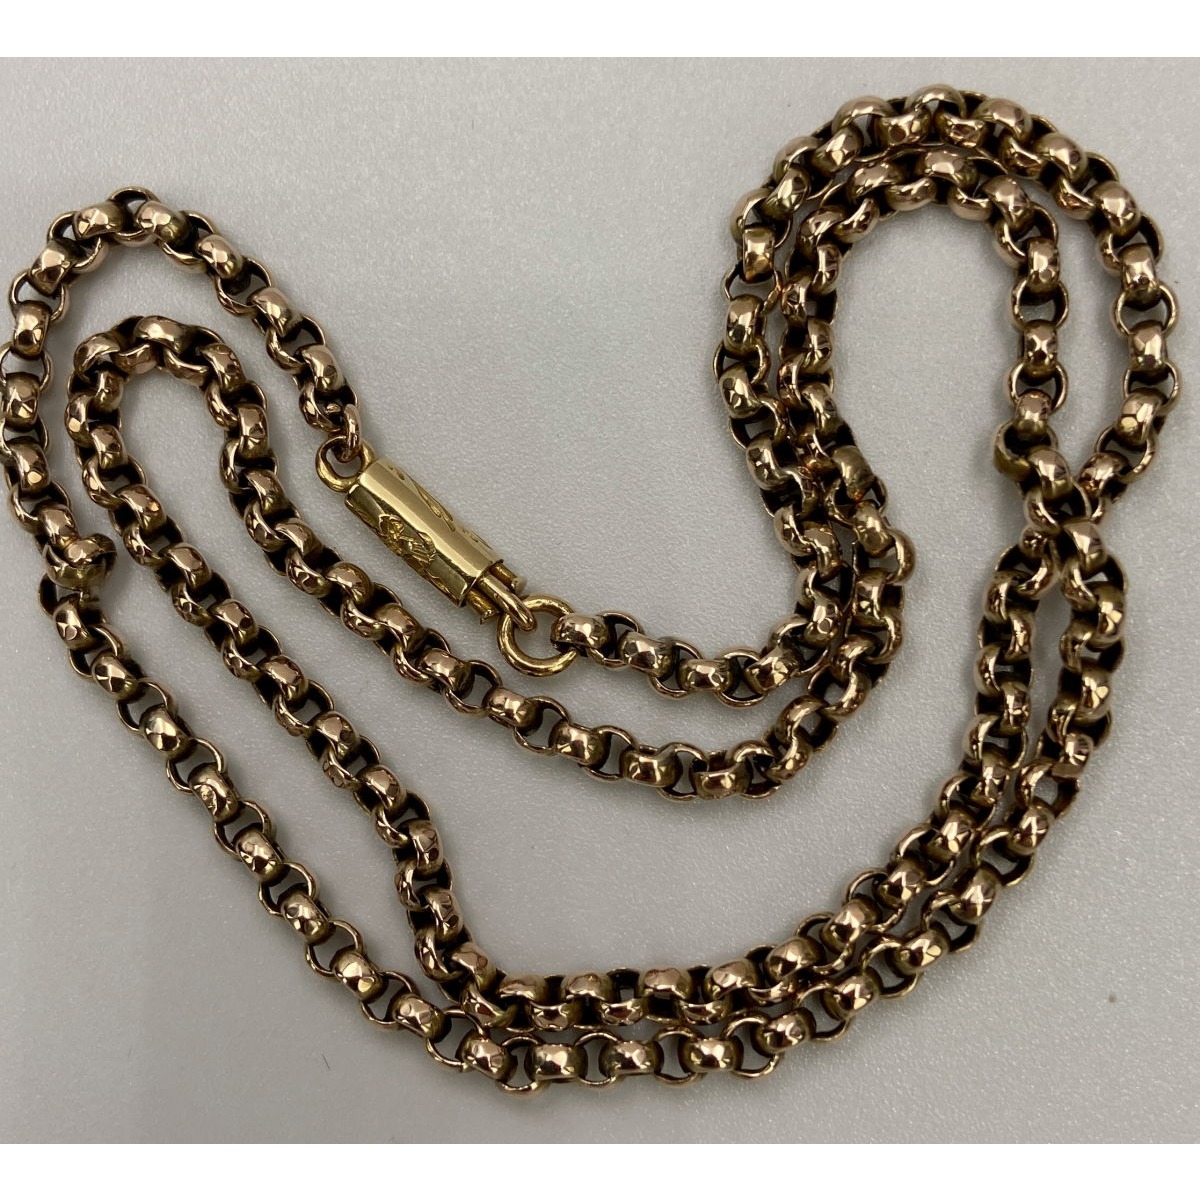 16.5" Small Rolo Link Antique English Gold Chain